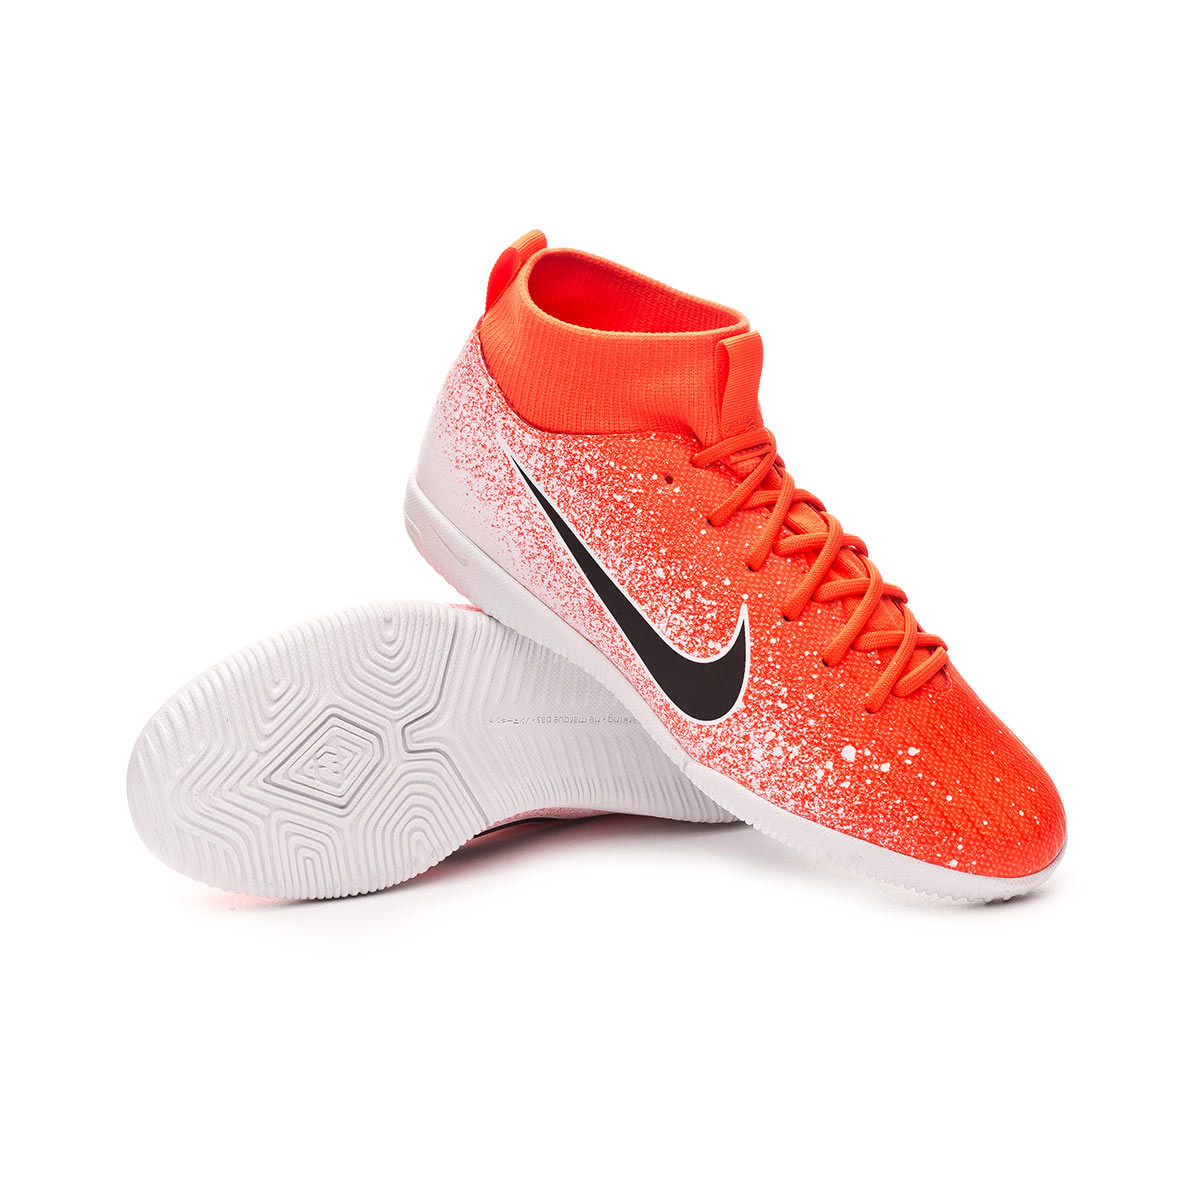 mercurial superfly 6 academy ic